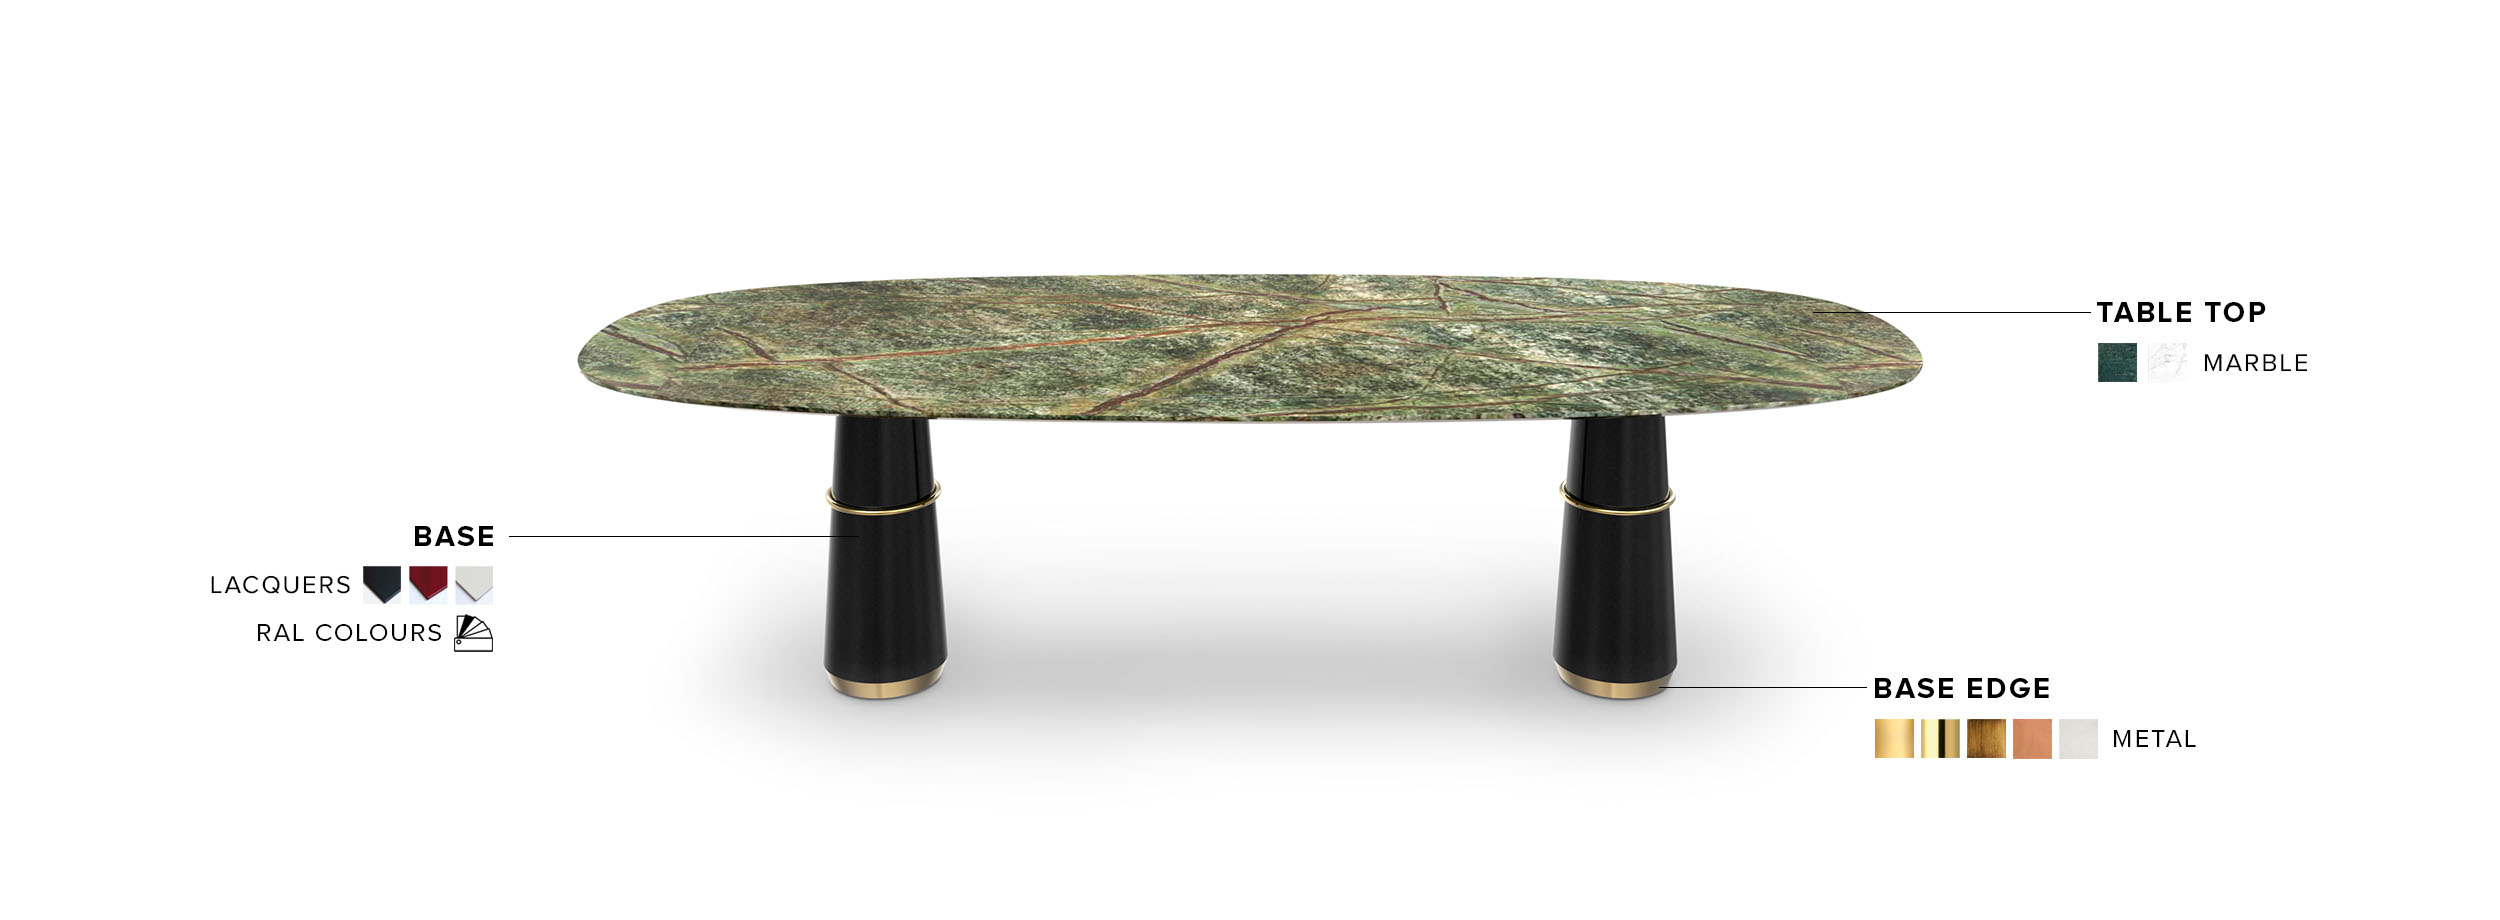 Agra III Marble Dining Room Table with Brass Details Modern Contemporary - Home'Society